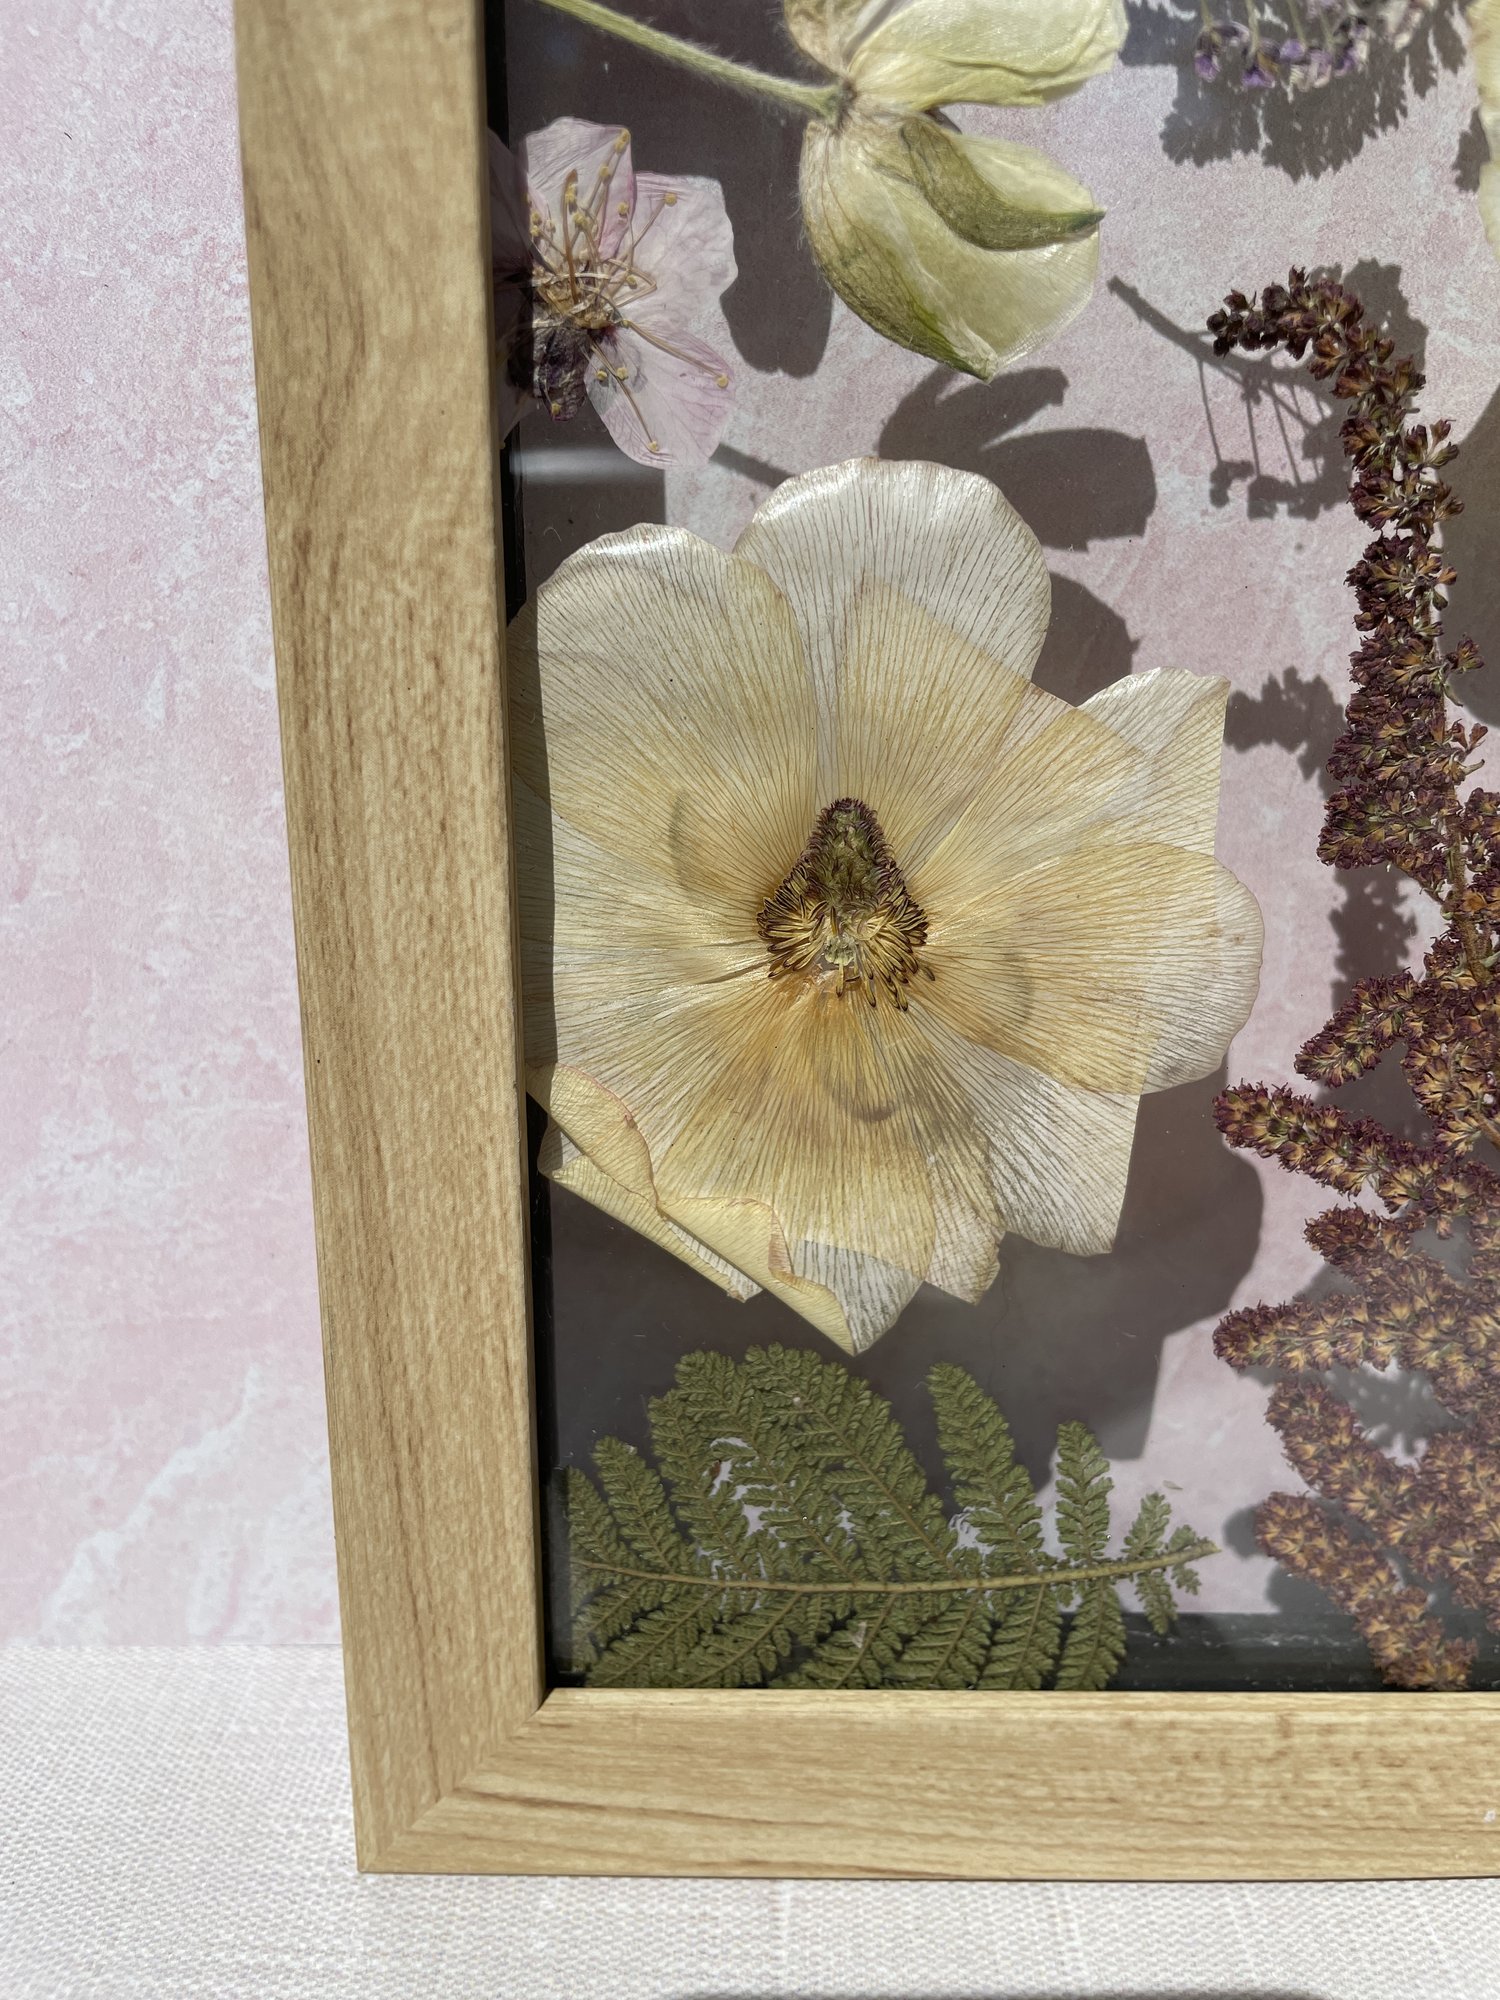 Mixed Leaves & Flowers Pressed Flower Frame, Pressed Dried Flower Frame,  Herbarium Floating Frame With Pressed Dried Flower 